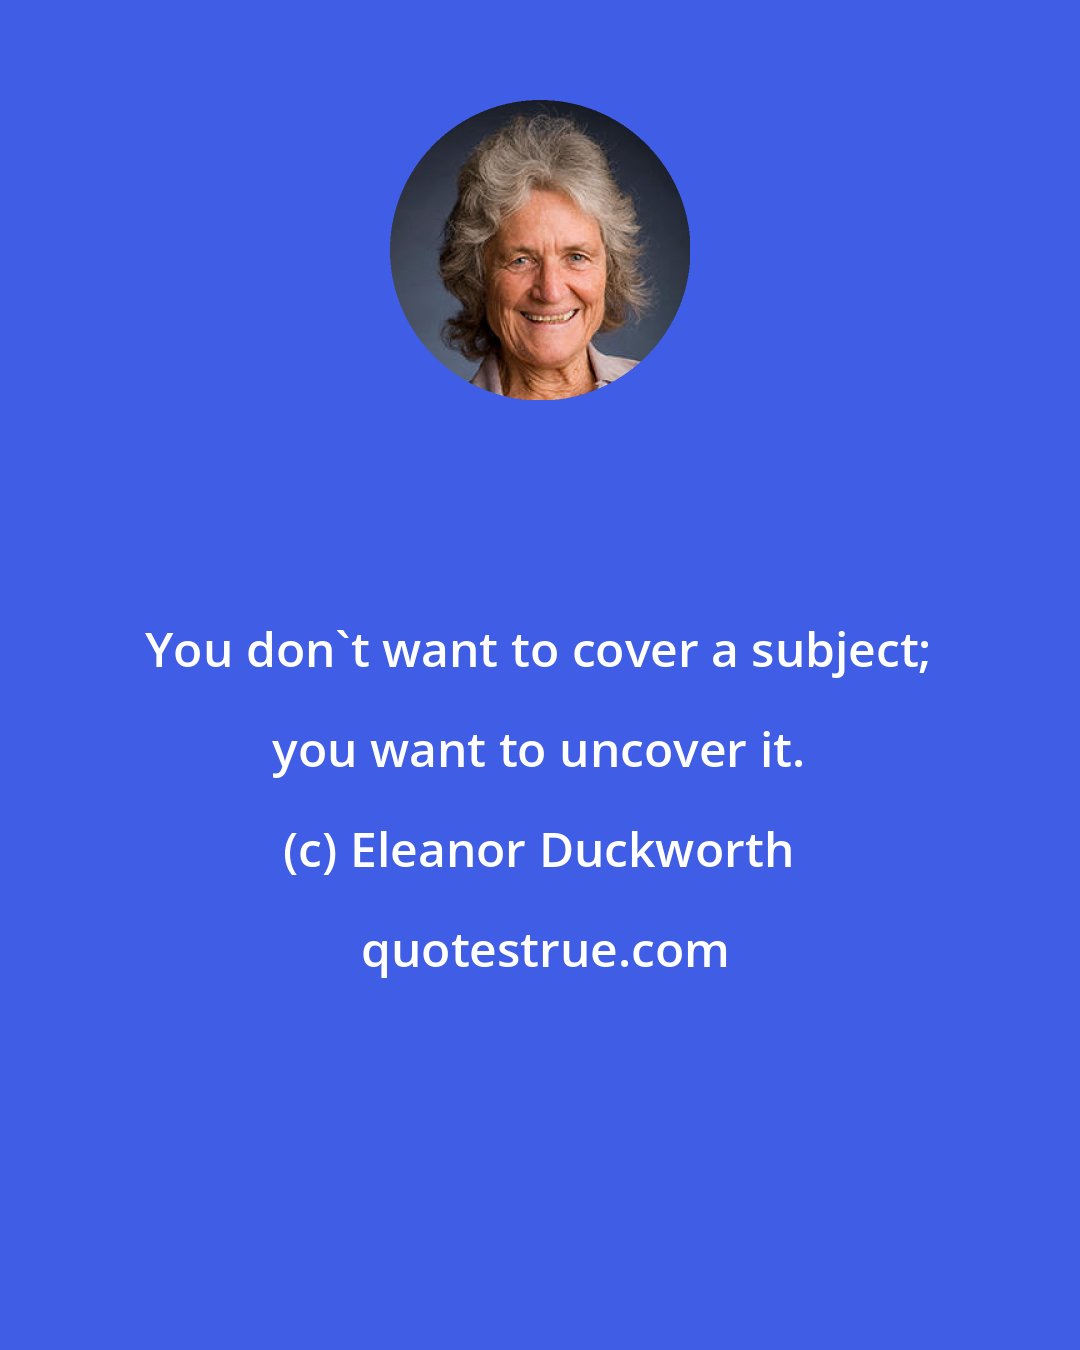 Eleanor Duckworth: You don't want to cover a subject; you want to uncover it.